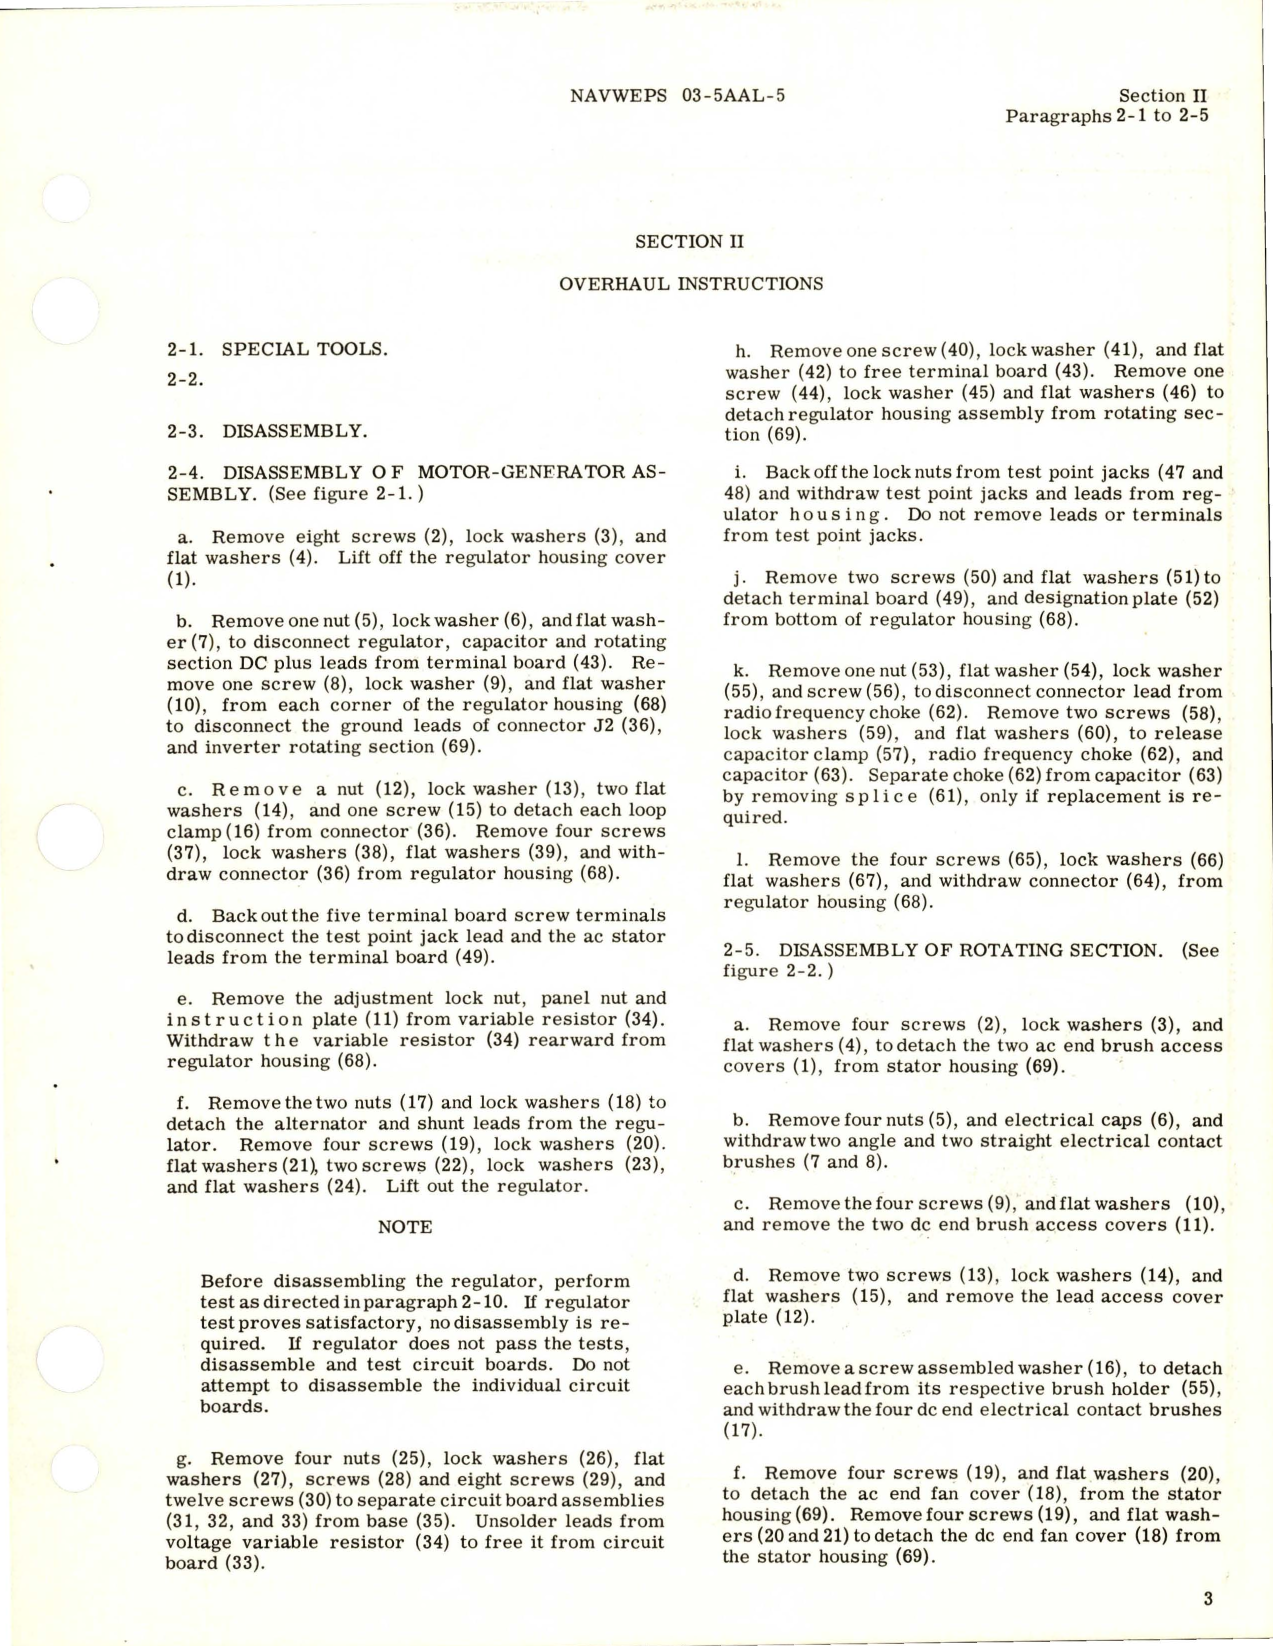 Sample page 7 from AirCorps Library document: Overhaul Instructions for Motor Generator - Part MGH182-100